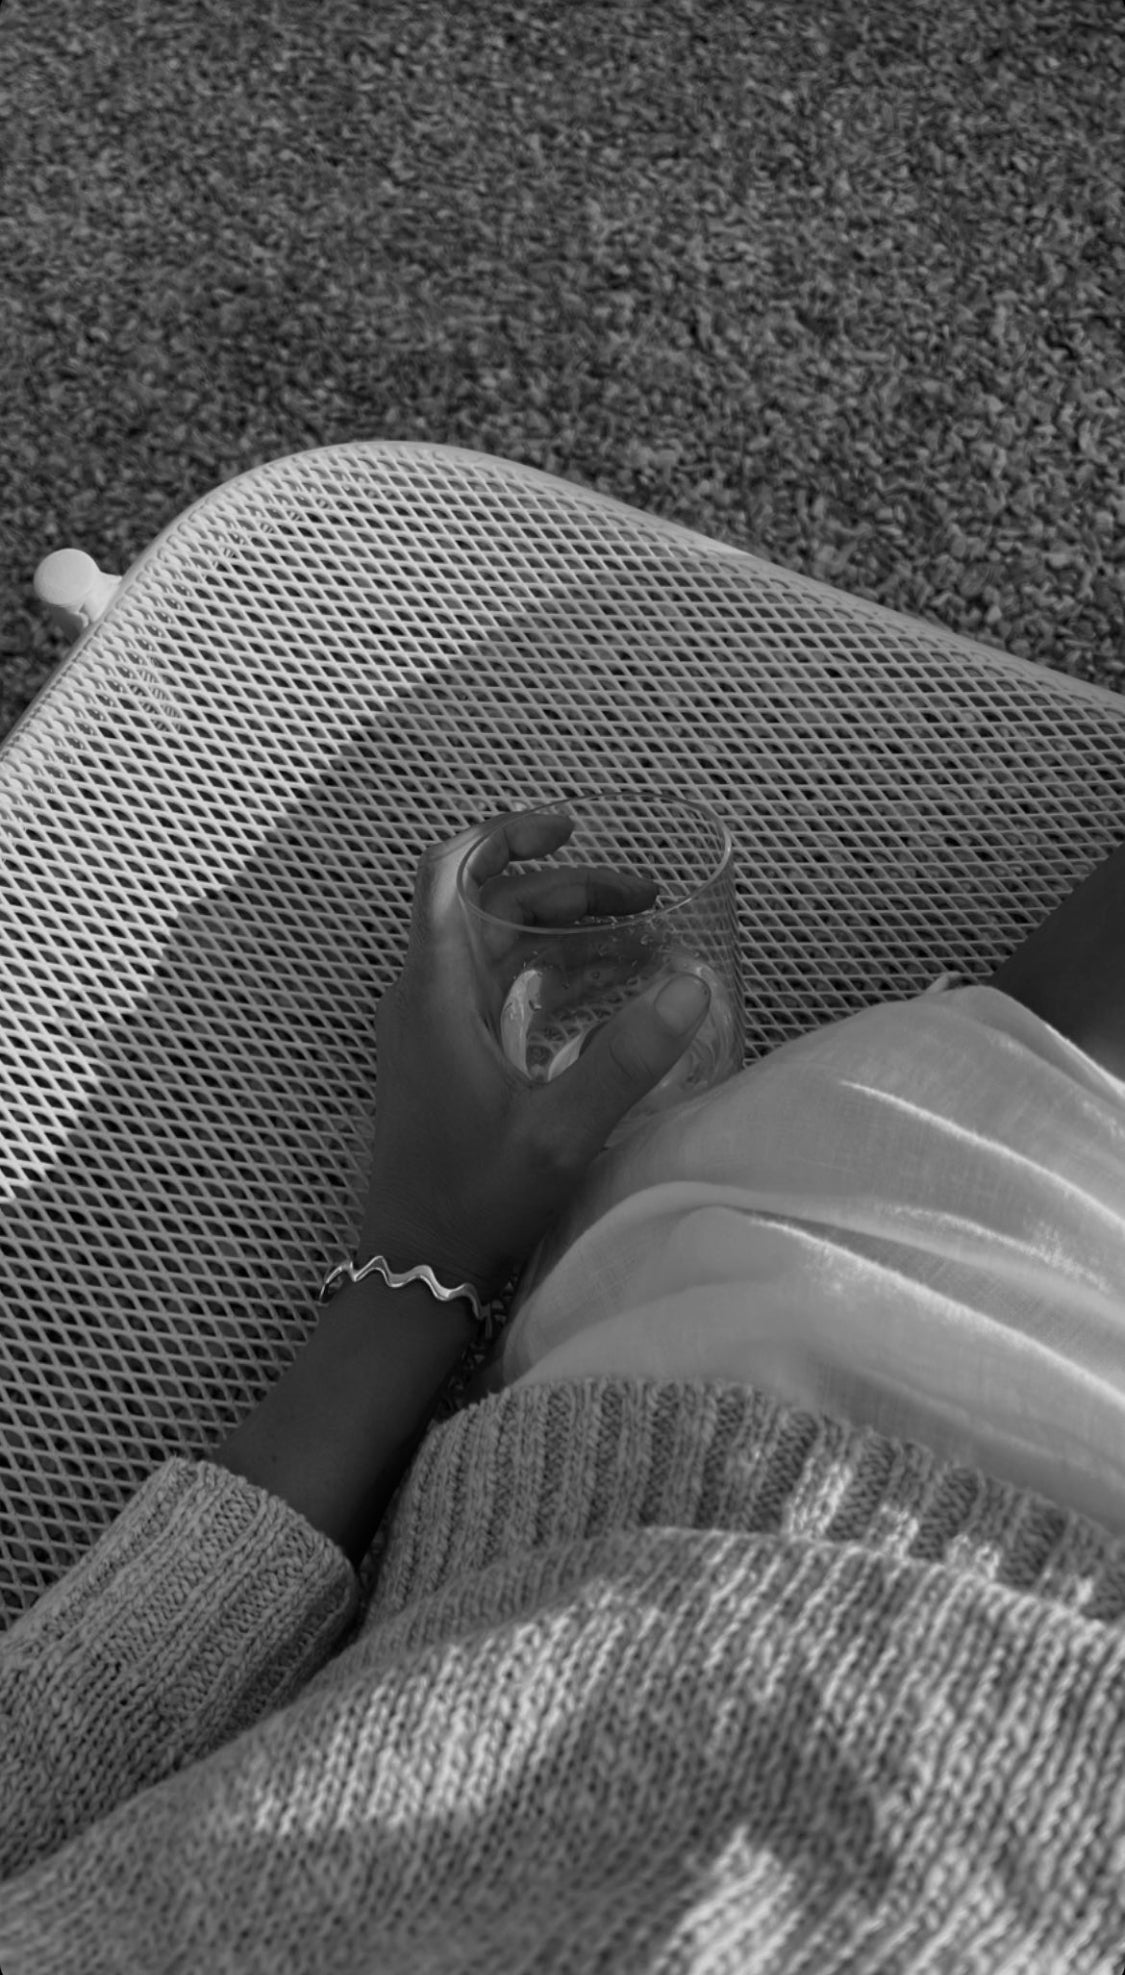 Black and white photo of a hand resting on a chair, wearing a bracelet